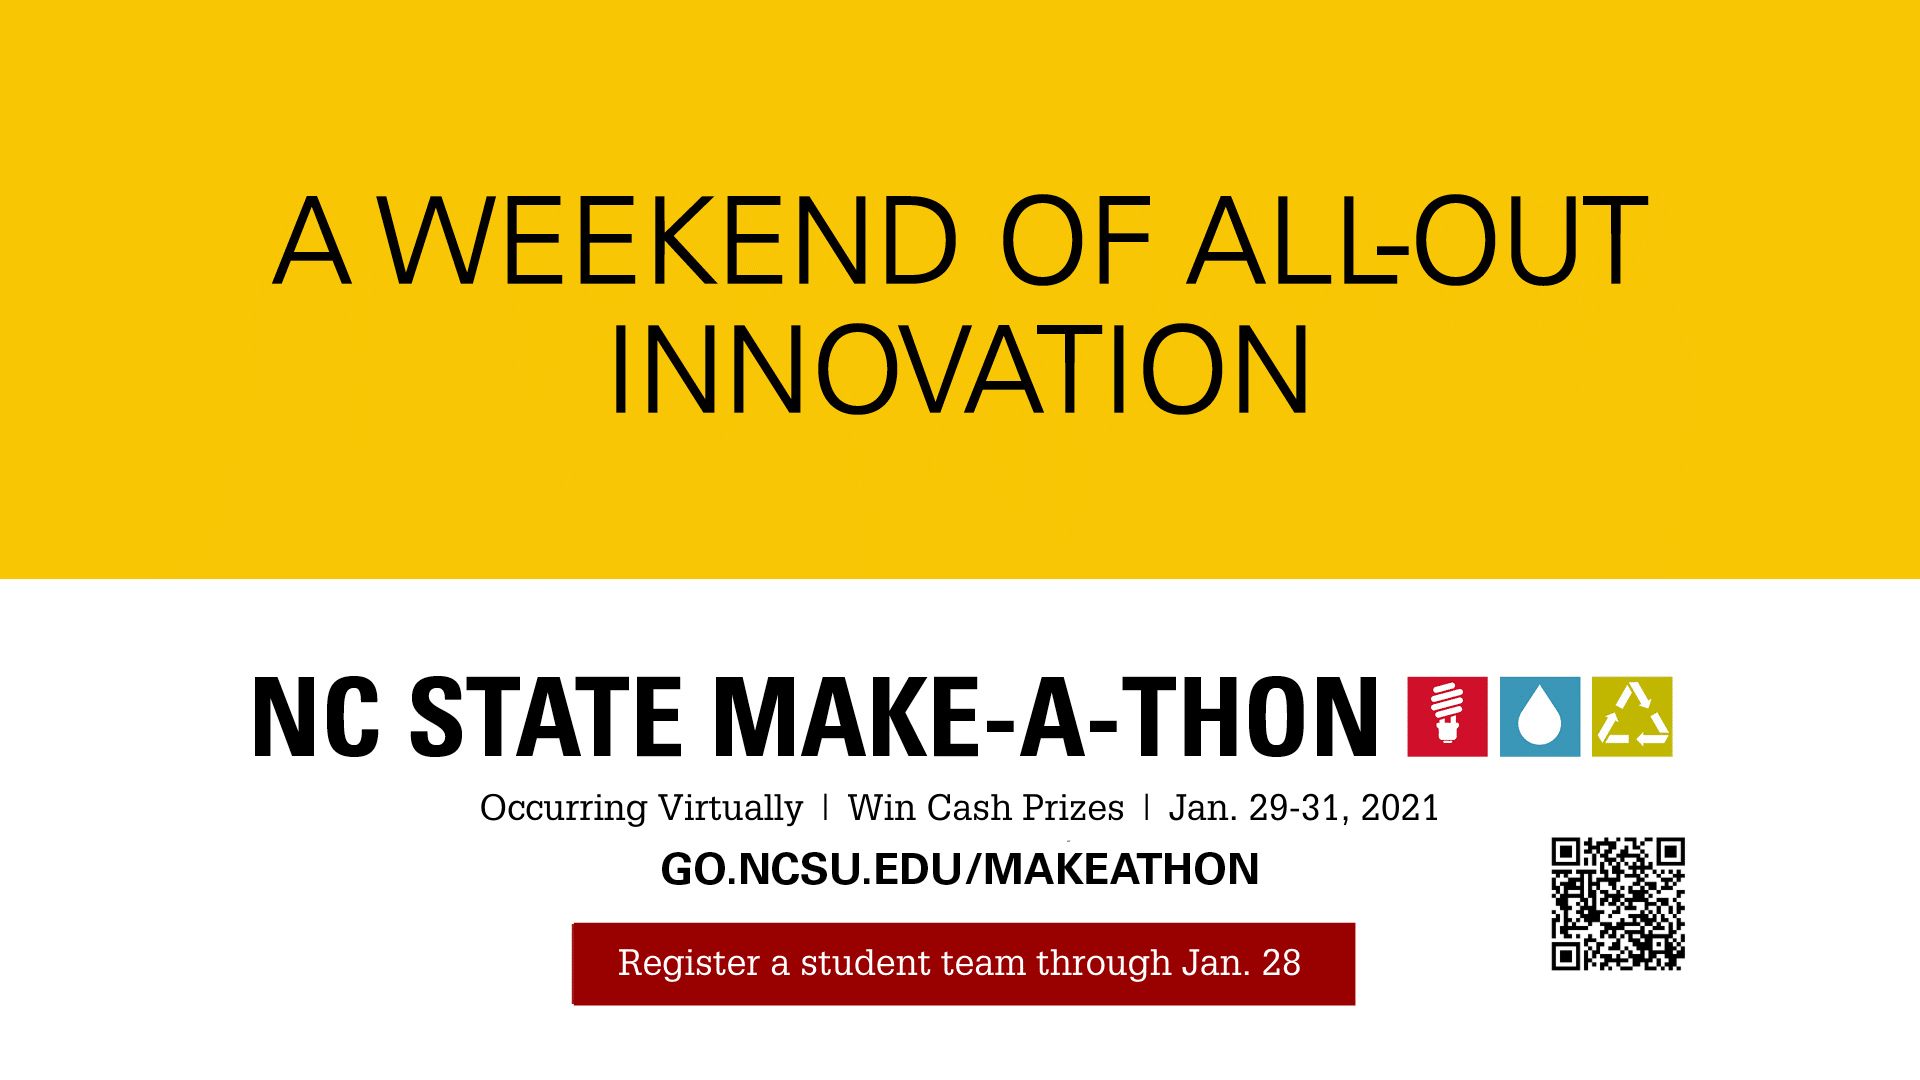 A weekend of all-out innovation. NC State Make-A-Thon Promo 2021